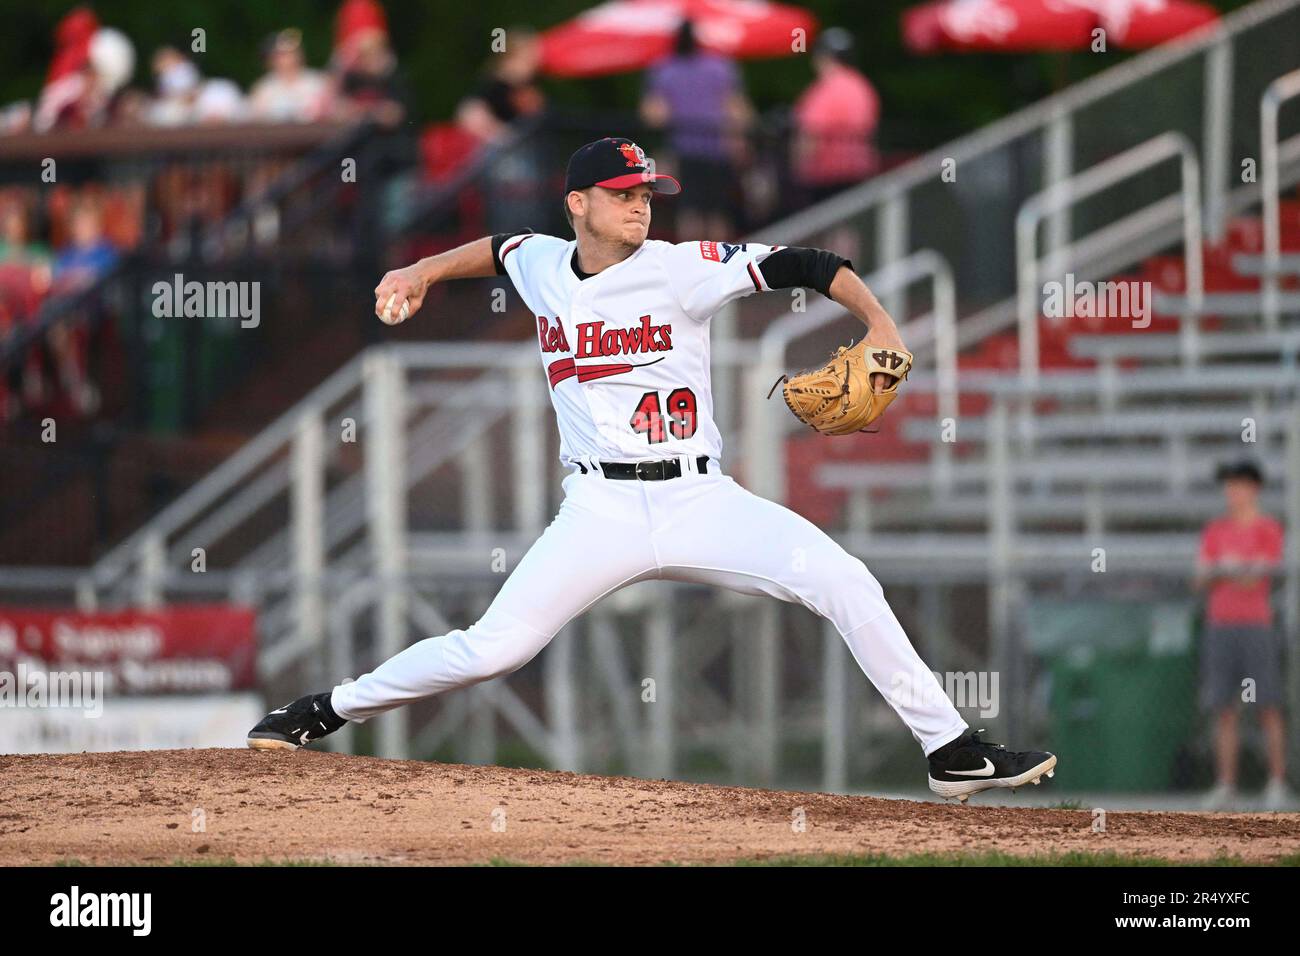 FM RedHawks pitcher Tanner Riley (49) delivers a pitch during the FM  Redhawks game against the Sioux Falls Canaries in American Association  professional baseball at Newman Outdoor Field in Fargo, ND on